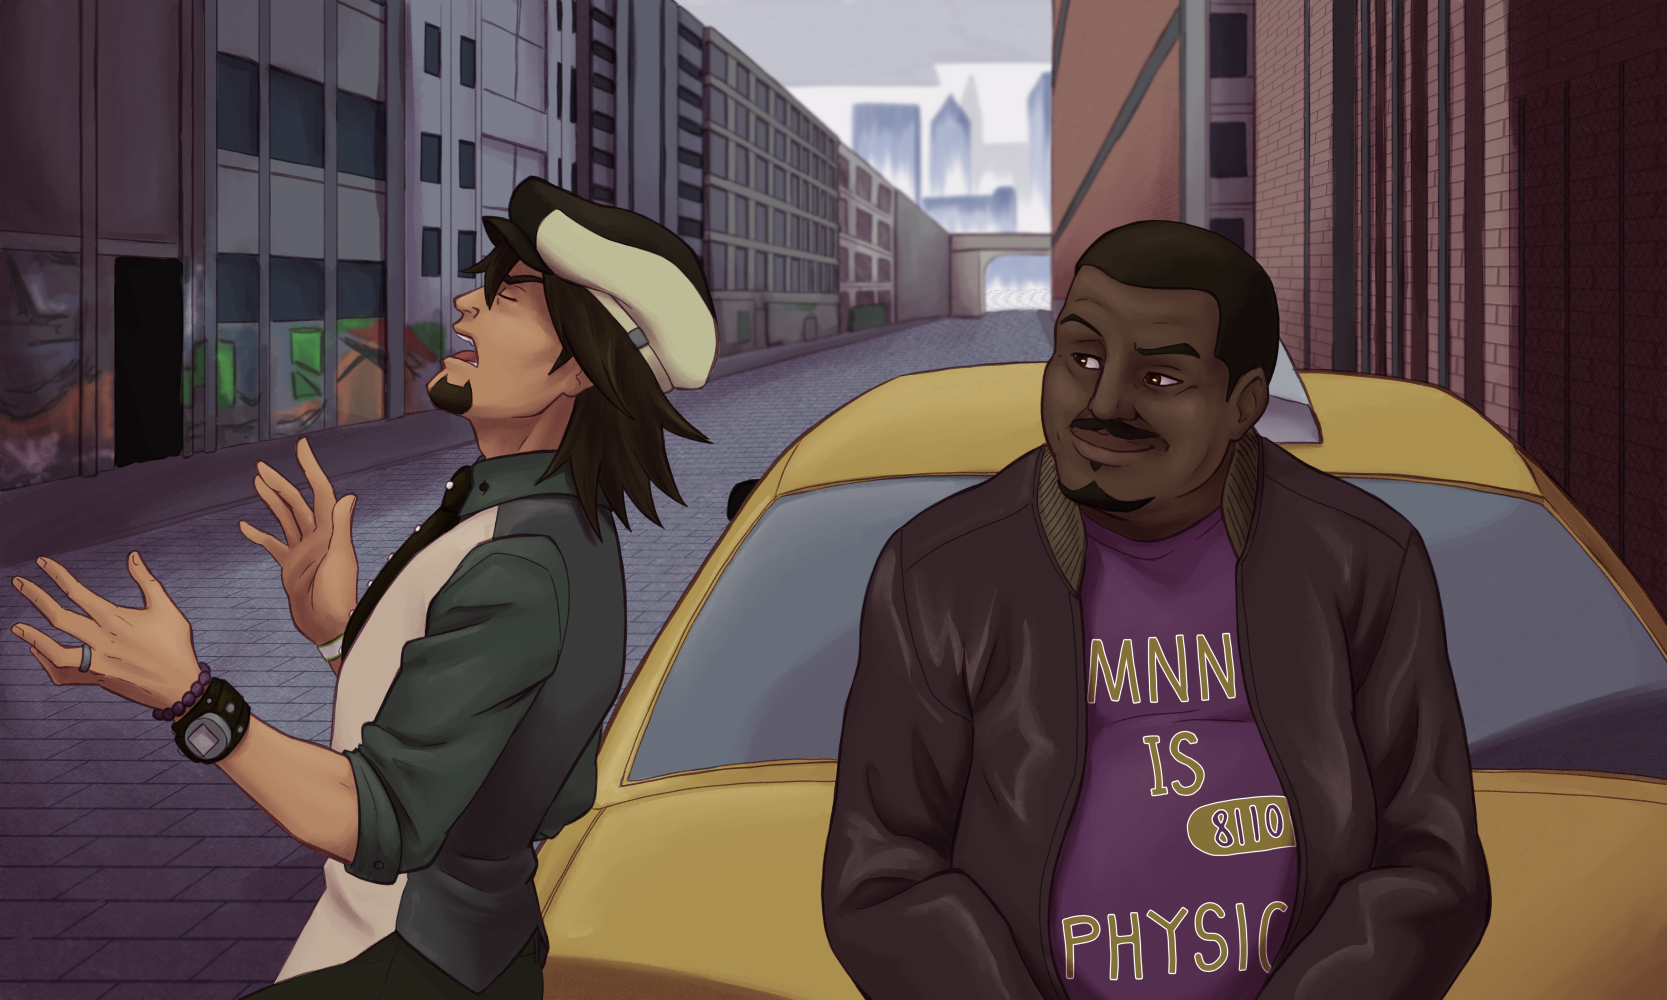 A piece of digital art redrawing a scene from the anime Tiger & Bunny. The characters Kotetsu Kaburagi and Ben Jackson lean against a taxi, talking. In the background the city street stretches into the distance.